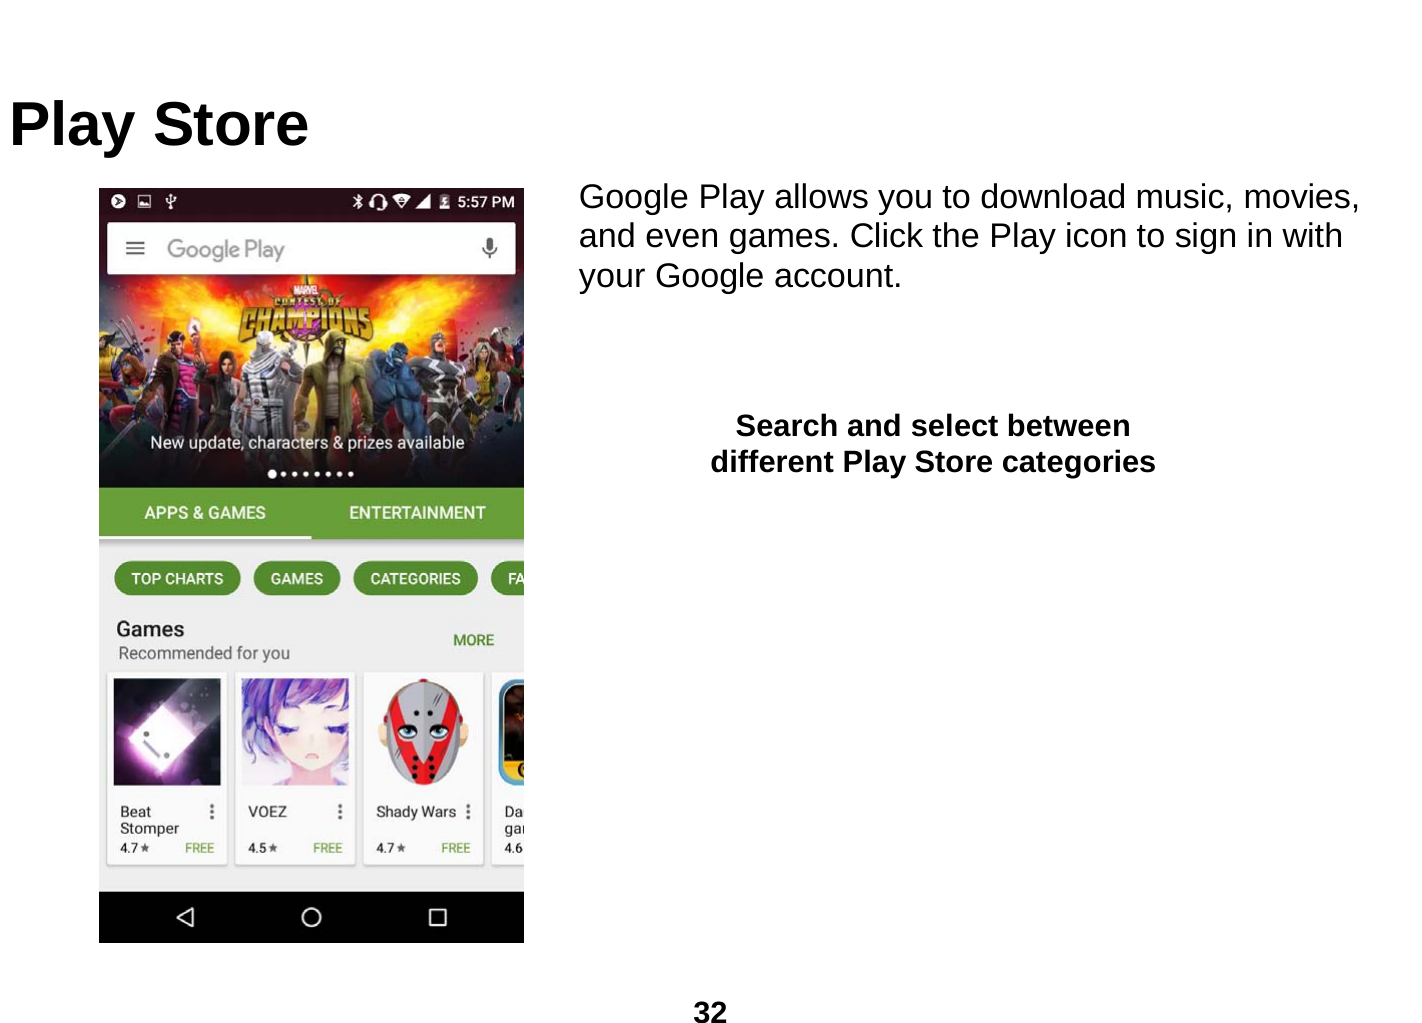  32  Play Store Google Play allows you to download music, movies, and even games. Click the Play icon to sign in with your Google account.        Search and select between different Play Store categories 